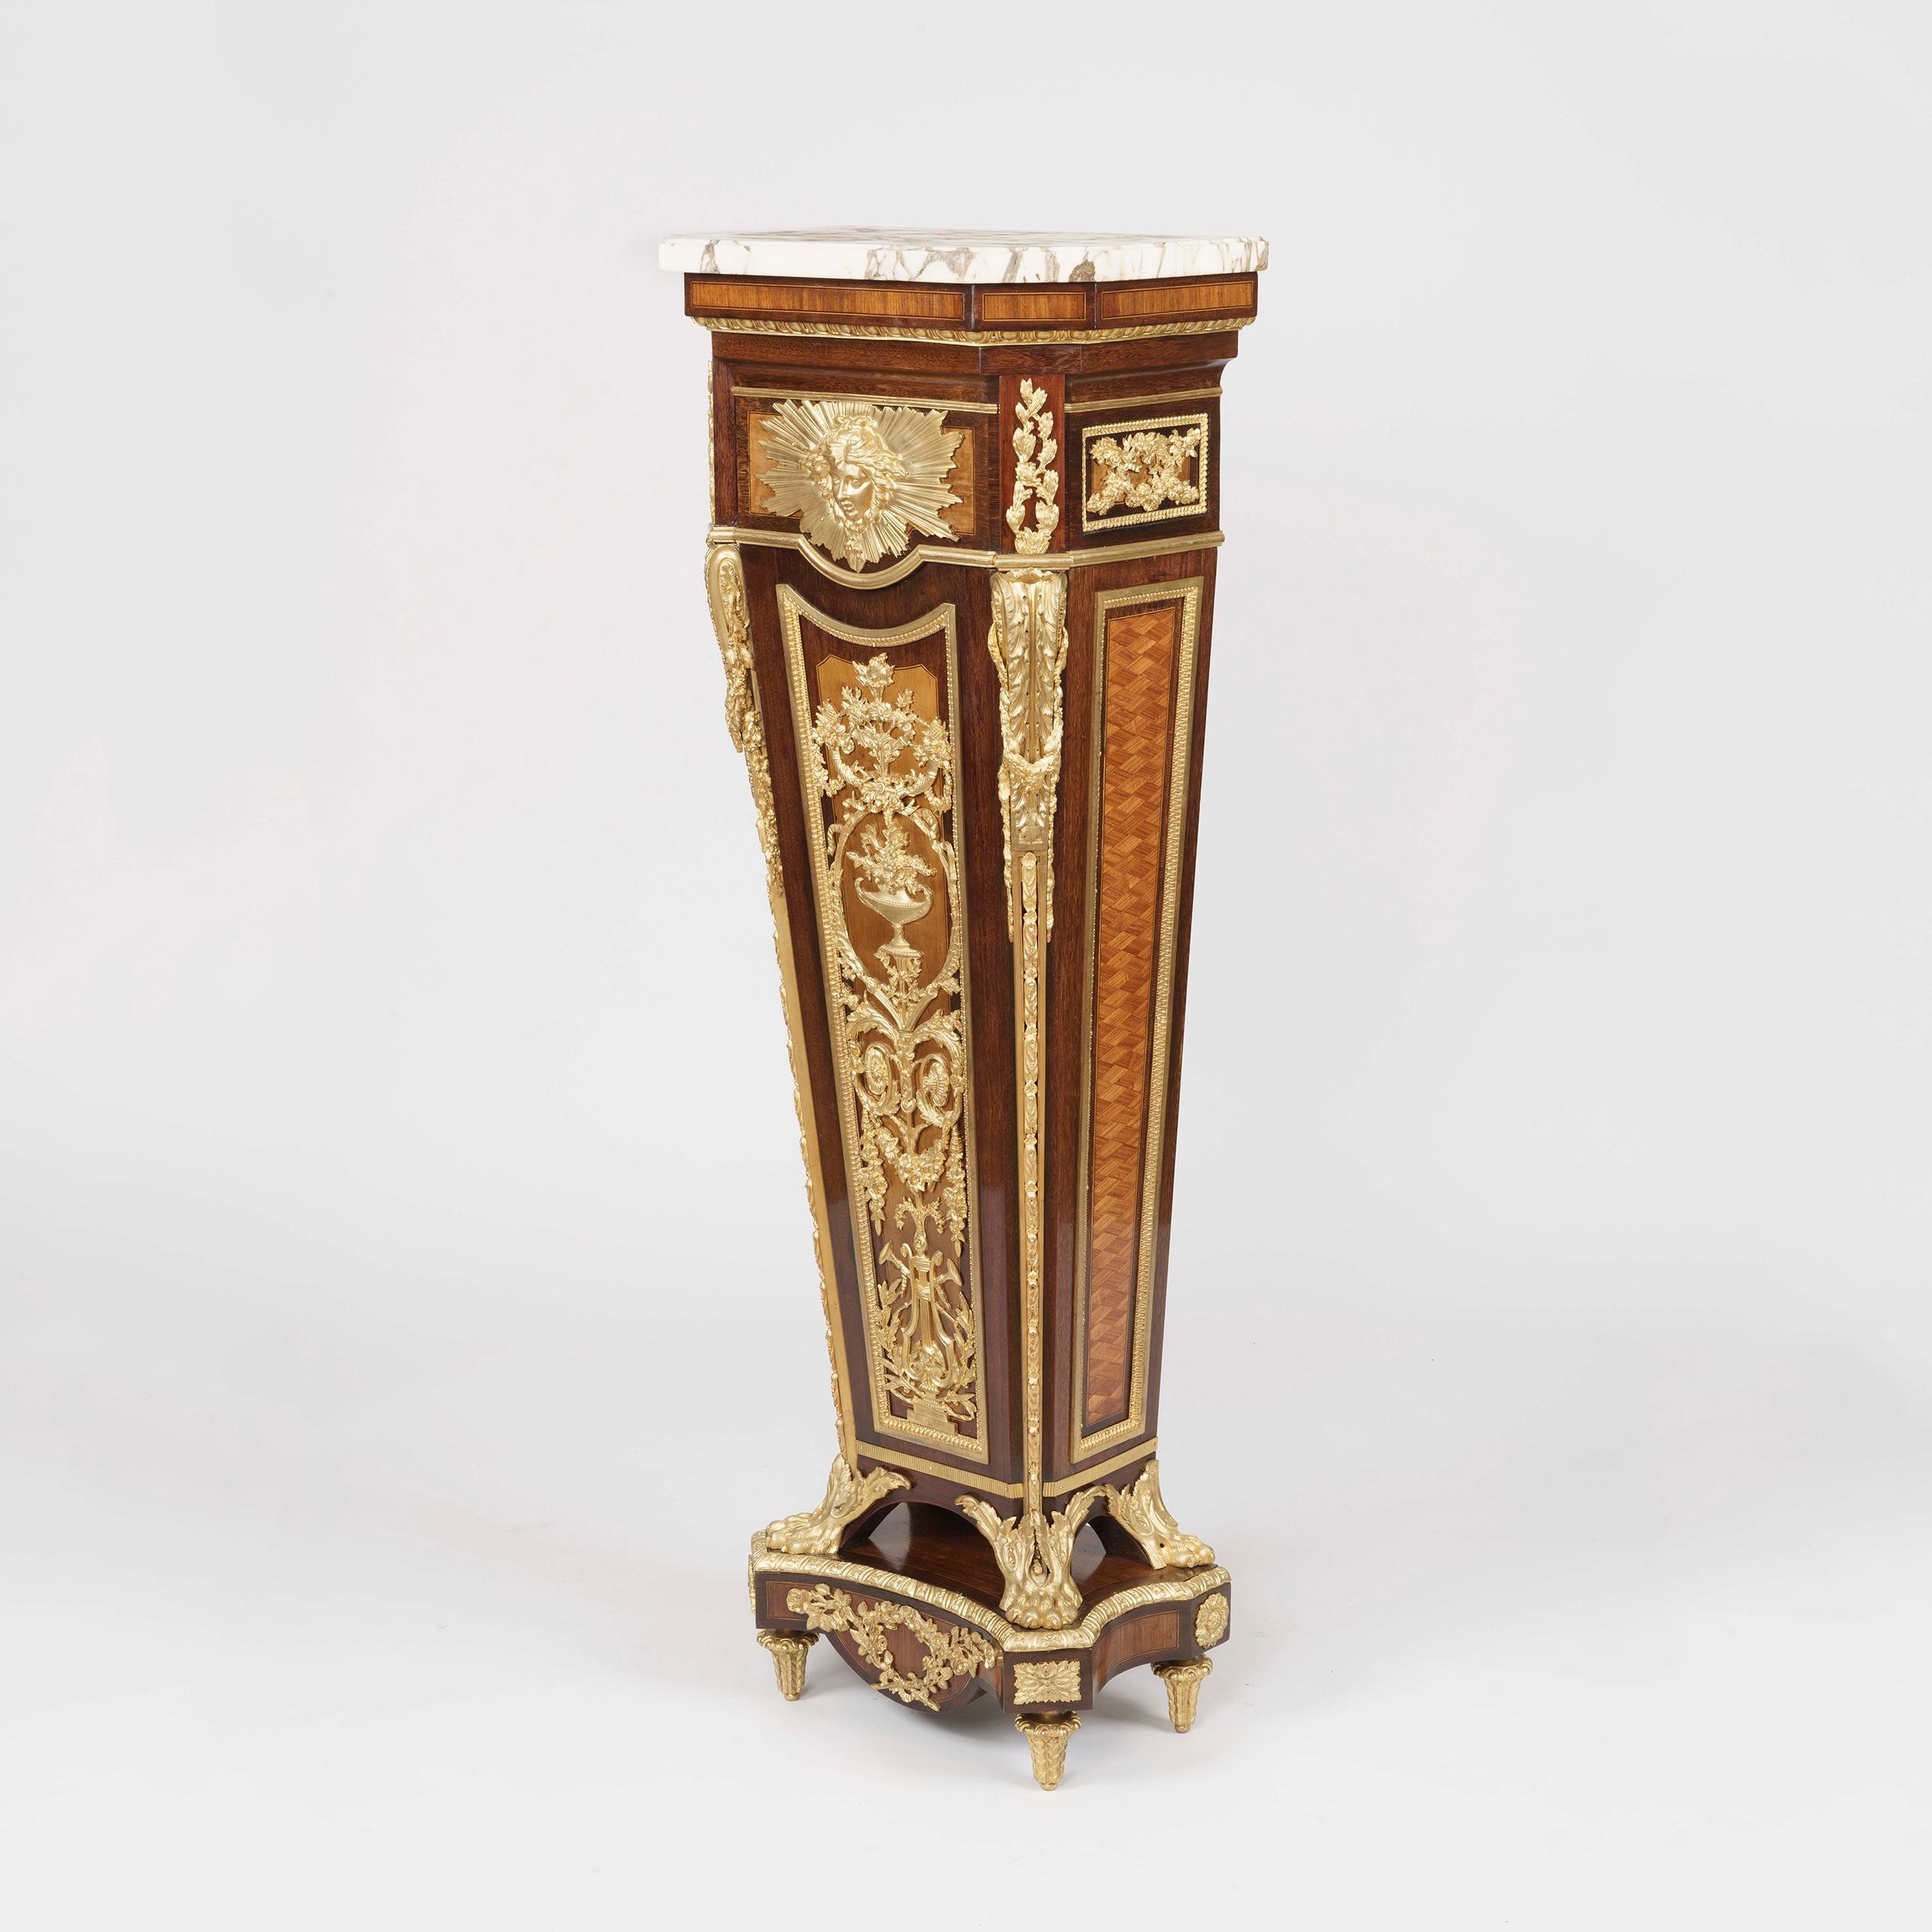 A Pedestal by E. Kahn of Paris
 After a model by Jean-Henri Riesener

Constructed in the Neo-Classical manner in fine specimen woods and high quality ormolu work; the incurved base, rising from ormolu toupie feet and conforming claspwork, the